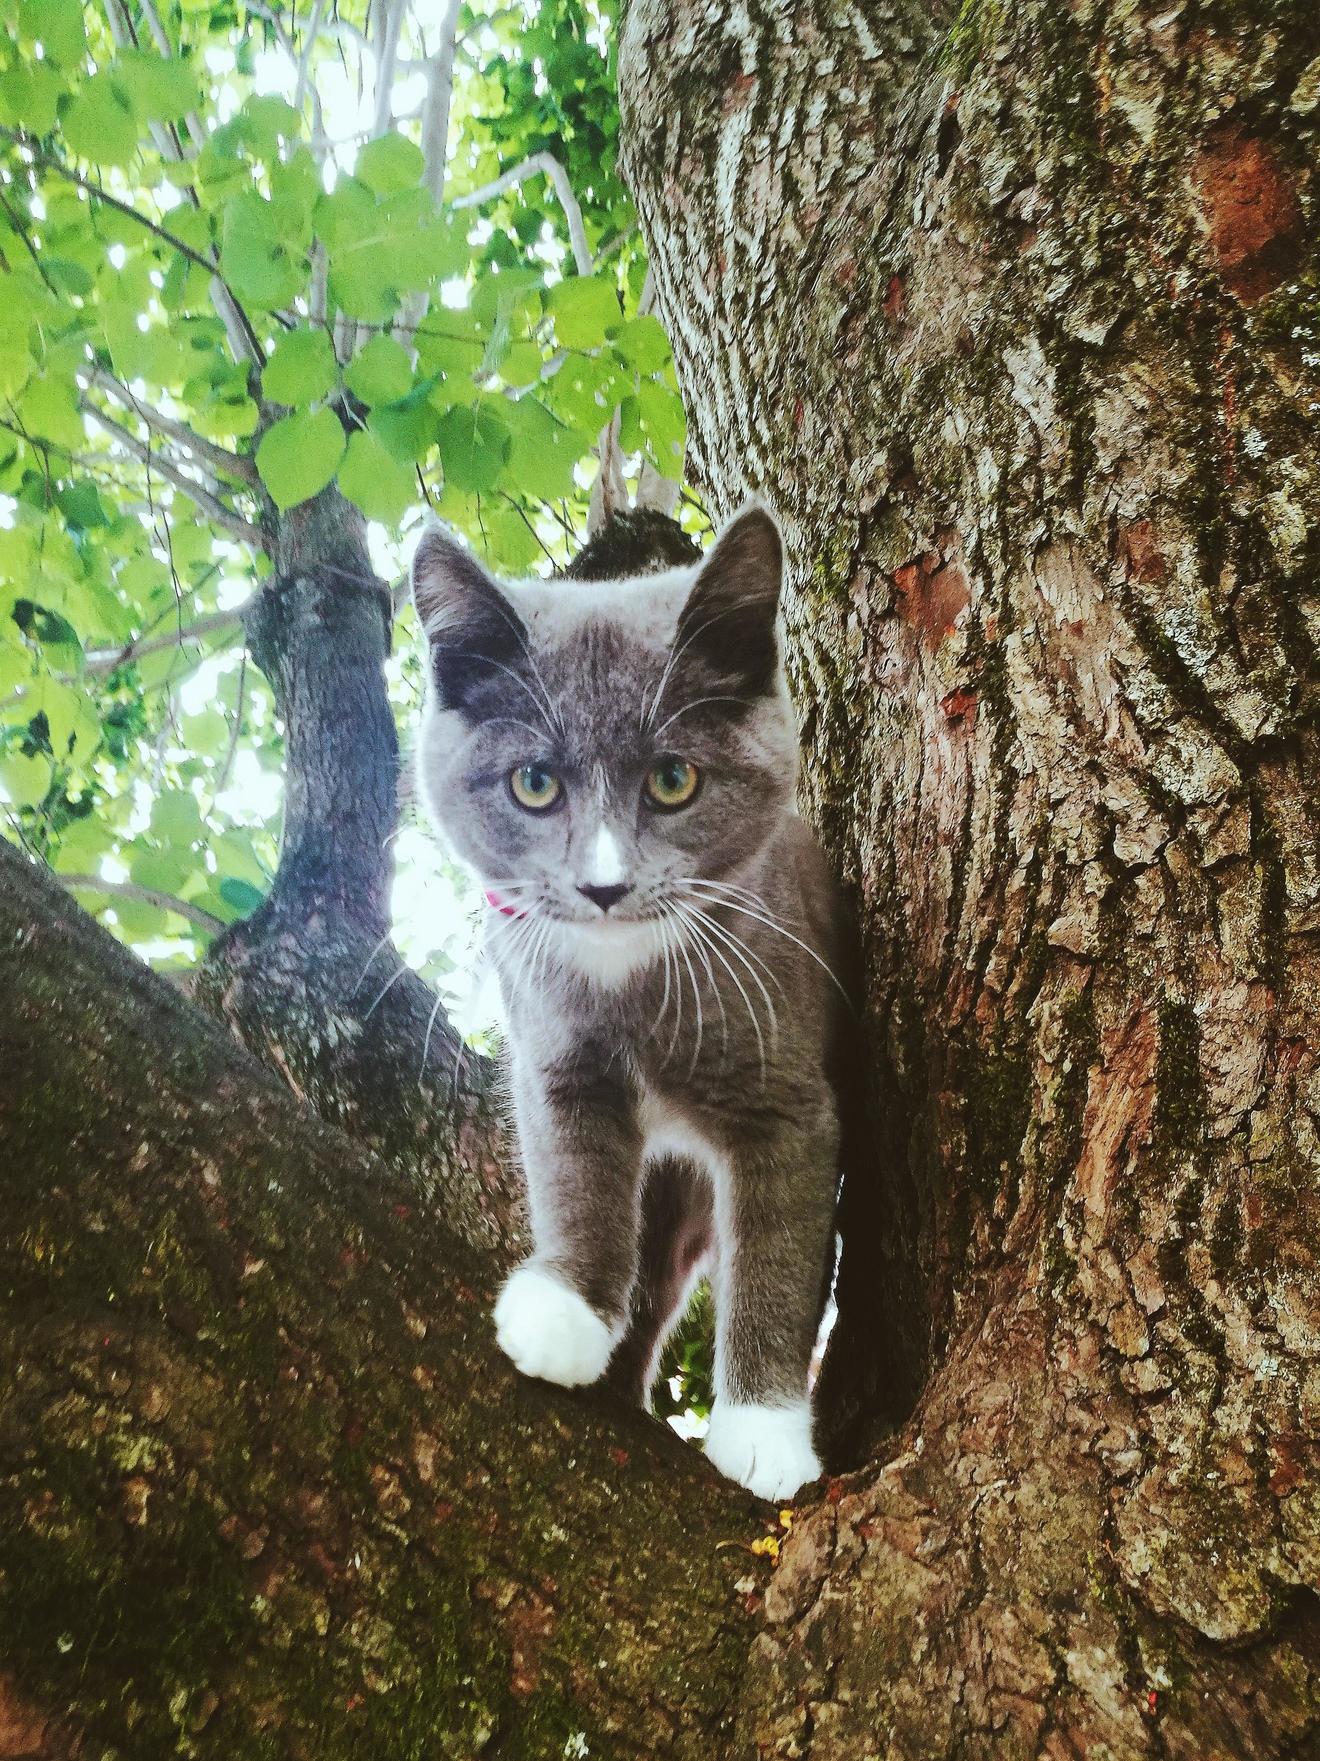 Syria keeping it serious in her tree